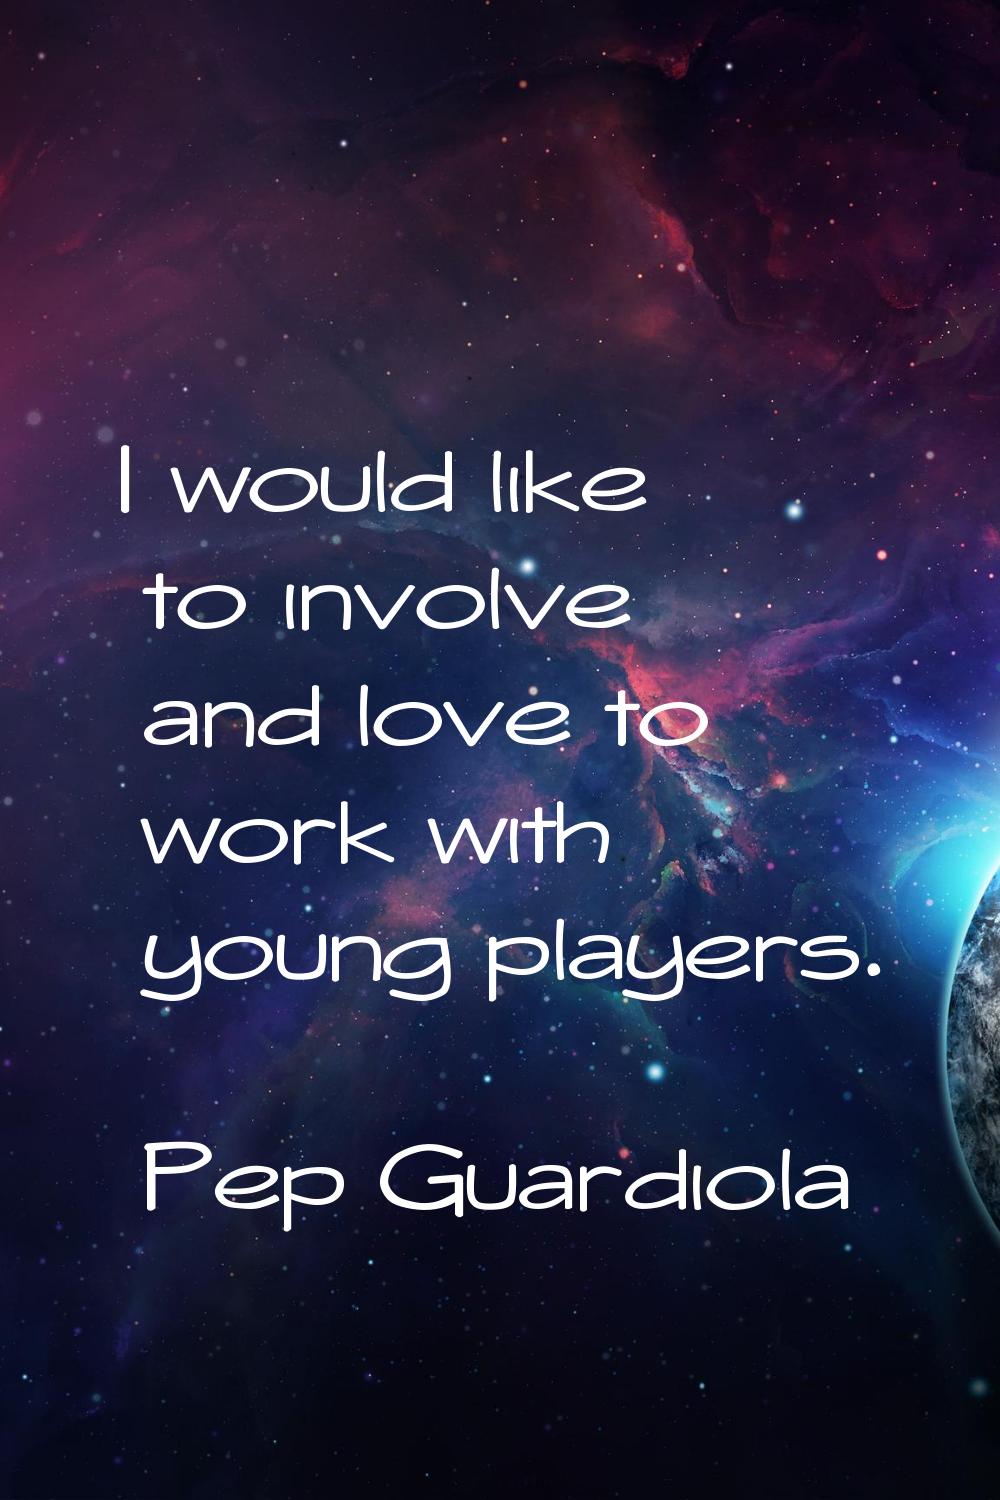 I would like to involve and love to work with young players.